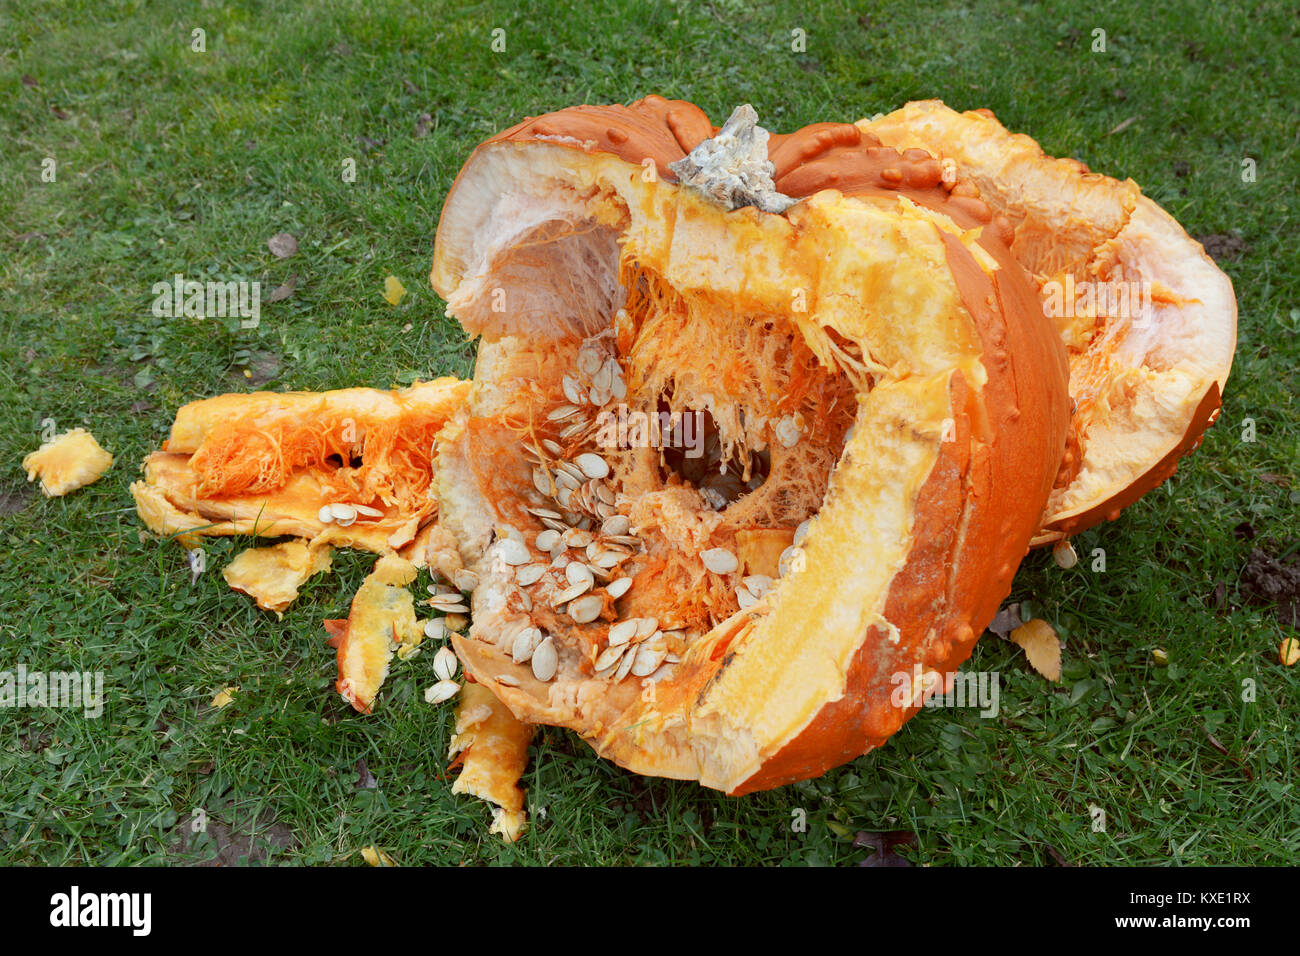 Roughly broken pumpkin pieces showing seeds and stringy flesh inside, spilled onto lawn Stock Photo